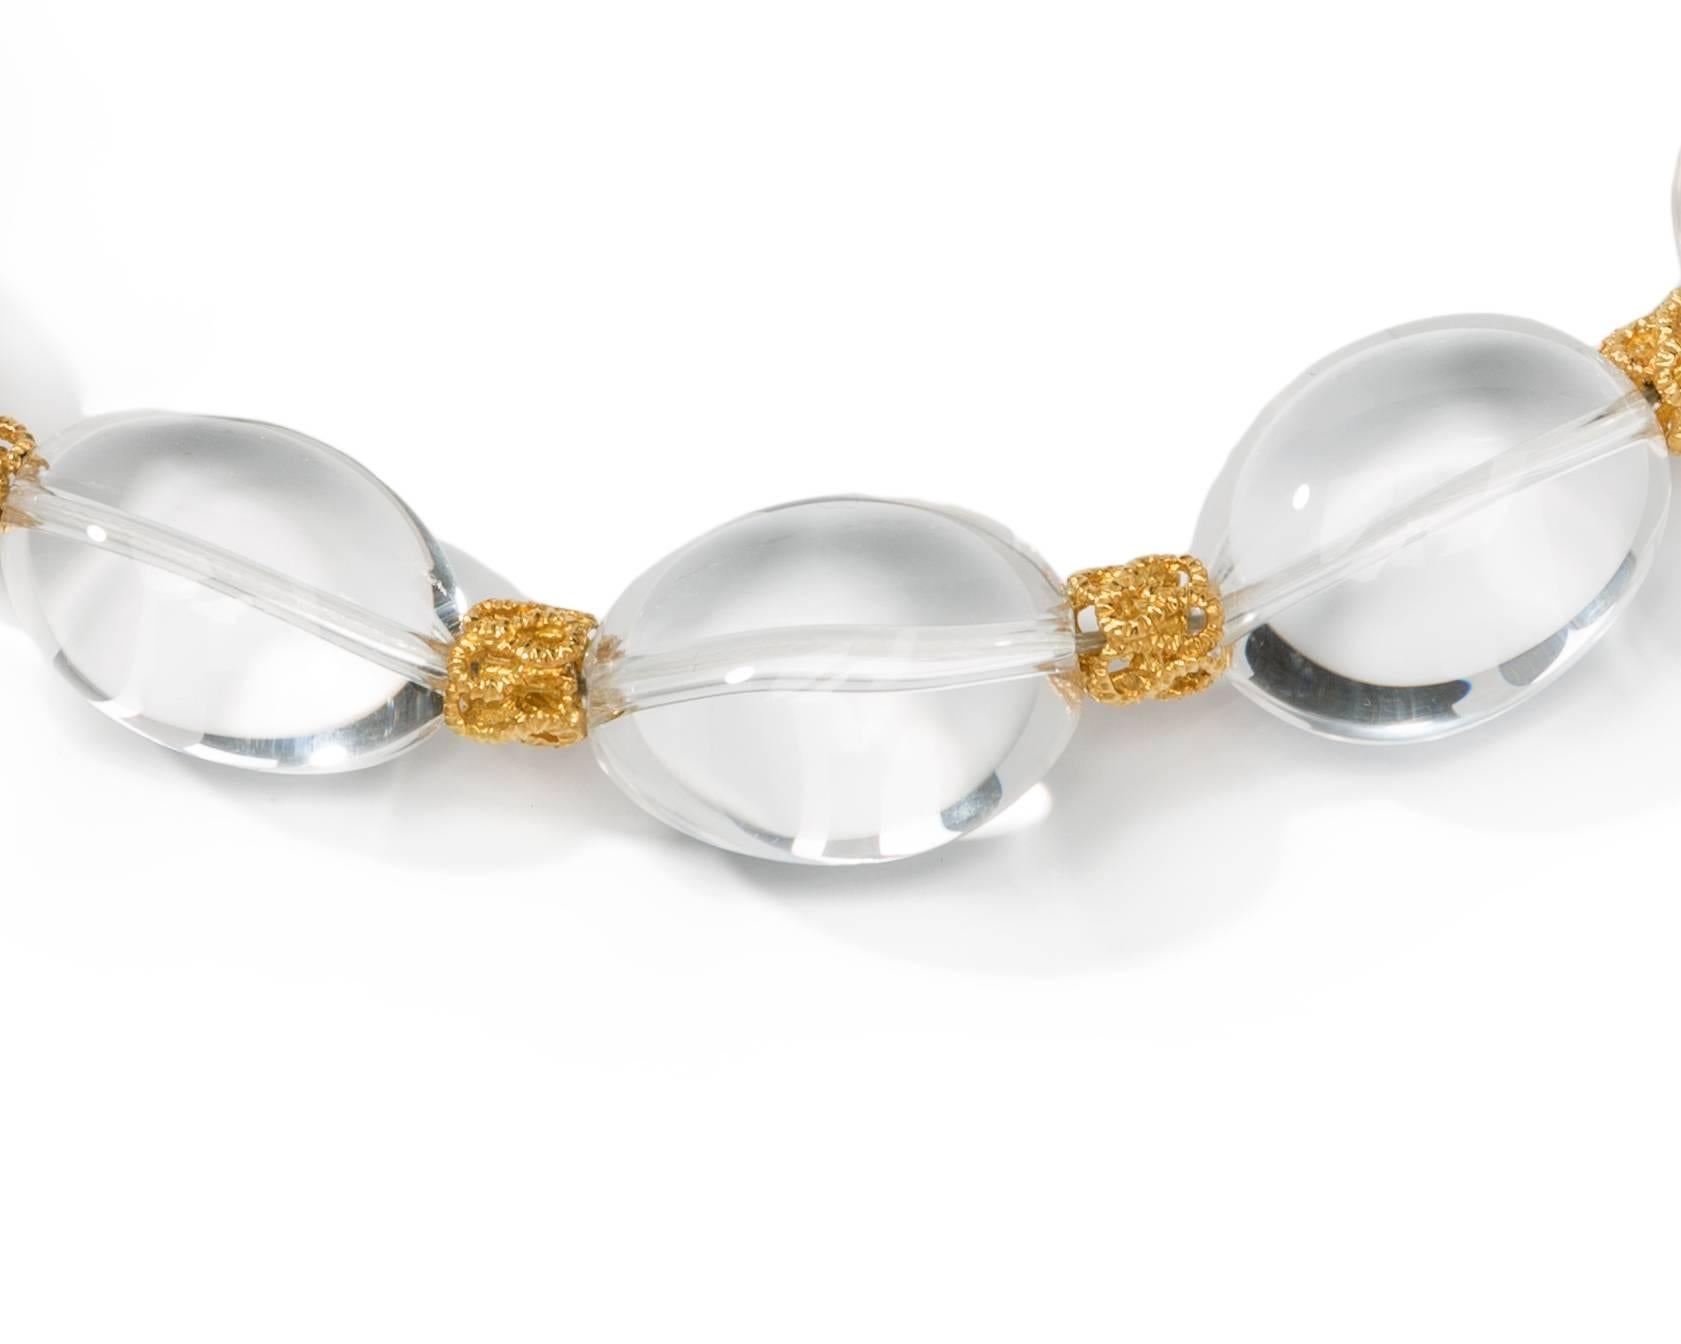 Italy, circa 1965. Set with 13 egg-shaped rock crystal beats. Separated by 12 18K yellow gold decoration pieces. 18K yellow ball clasp. Marked: 750, Star 293. ( Italian hallmarks) Total weight: 194.1 grams. Length: 18.5 in ( 47 cm )